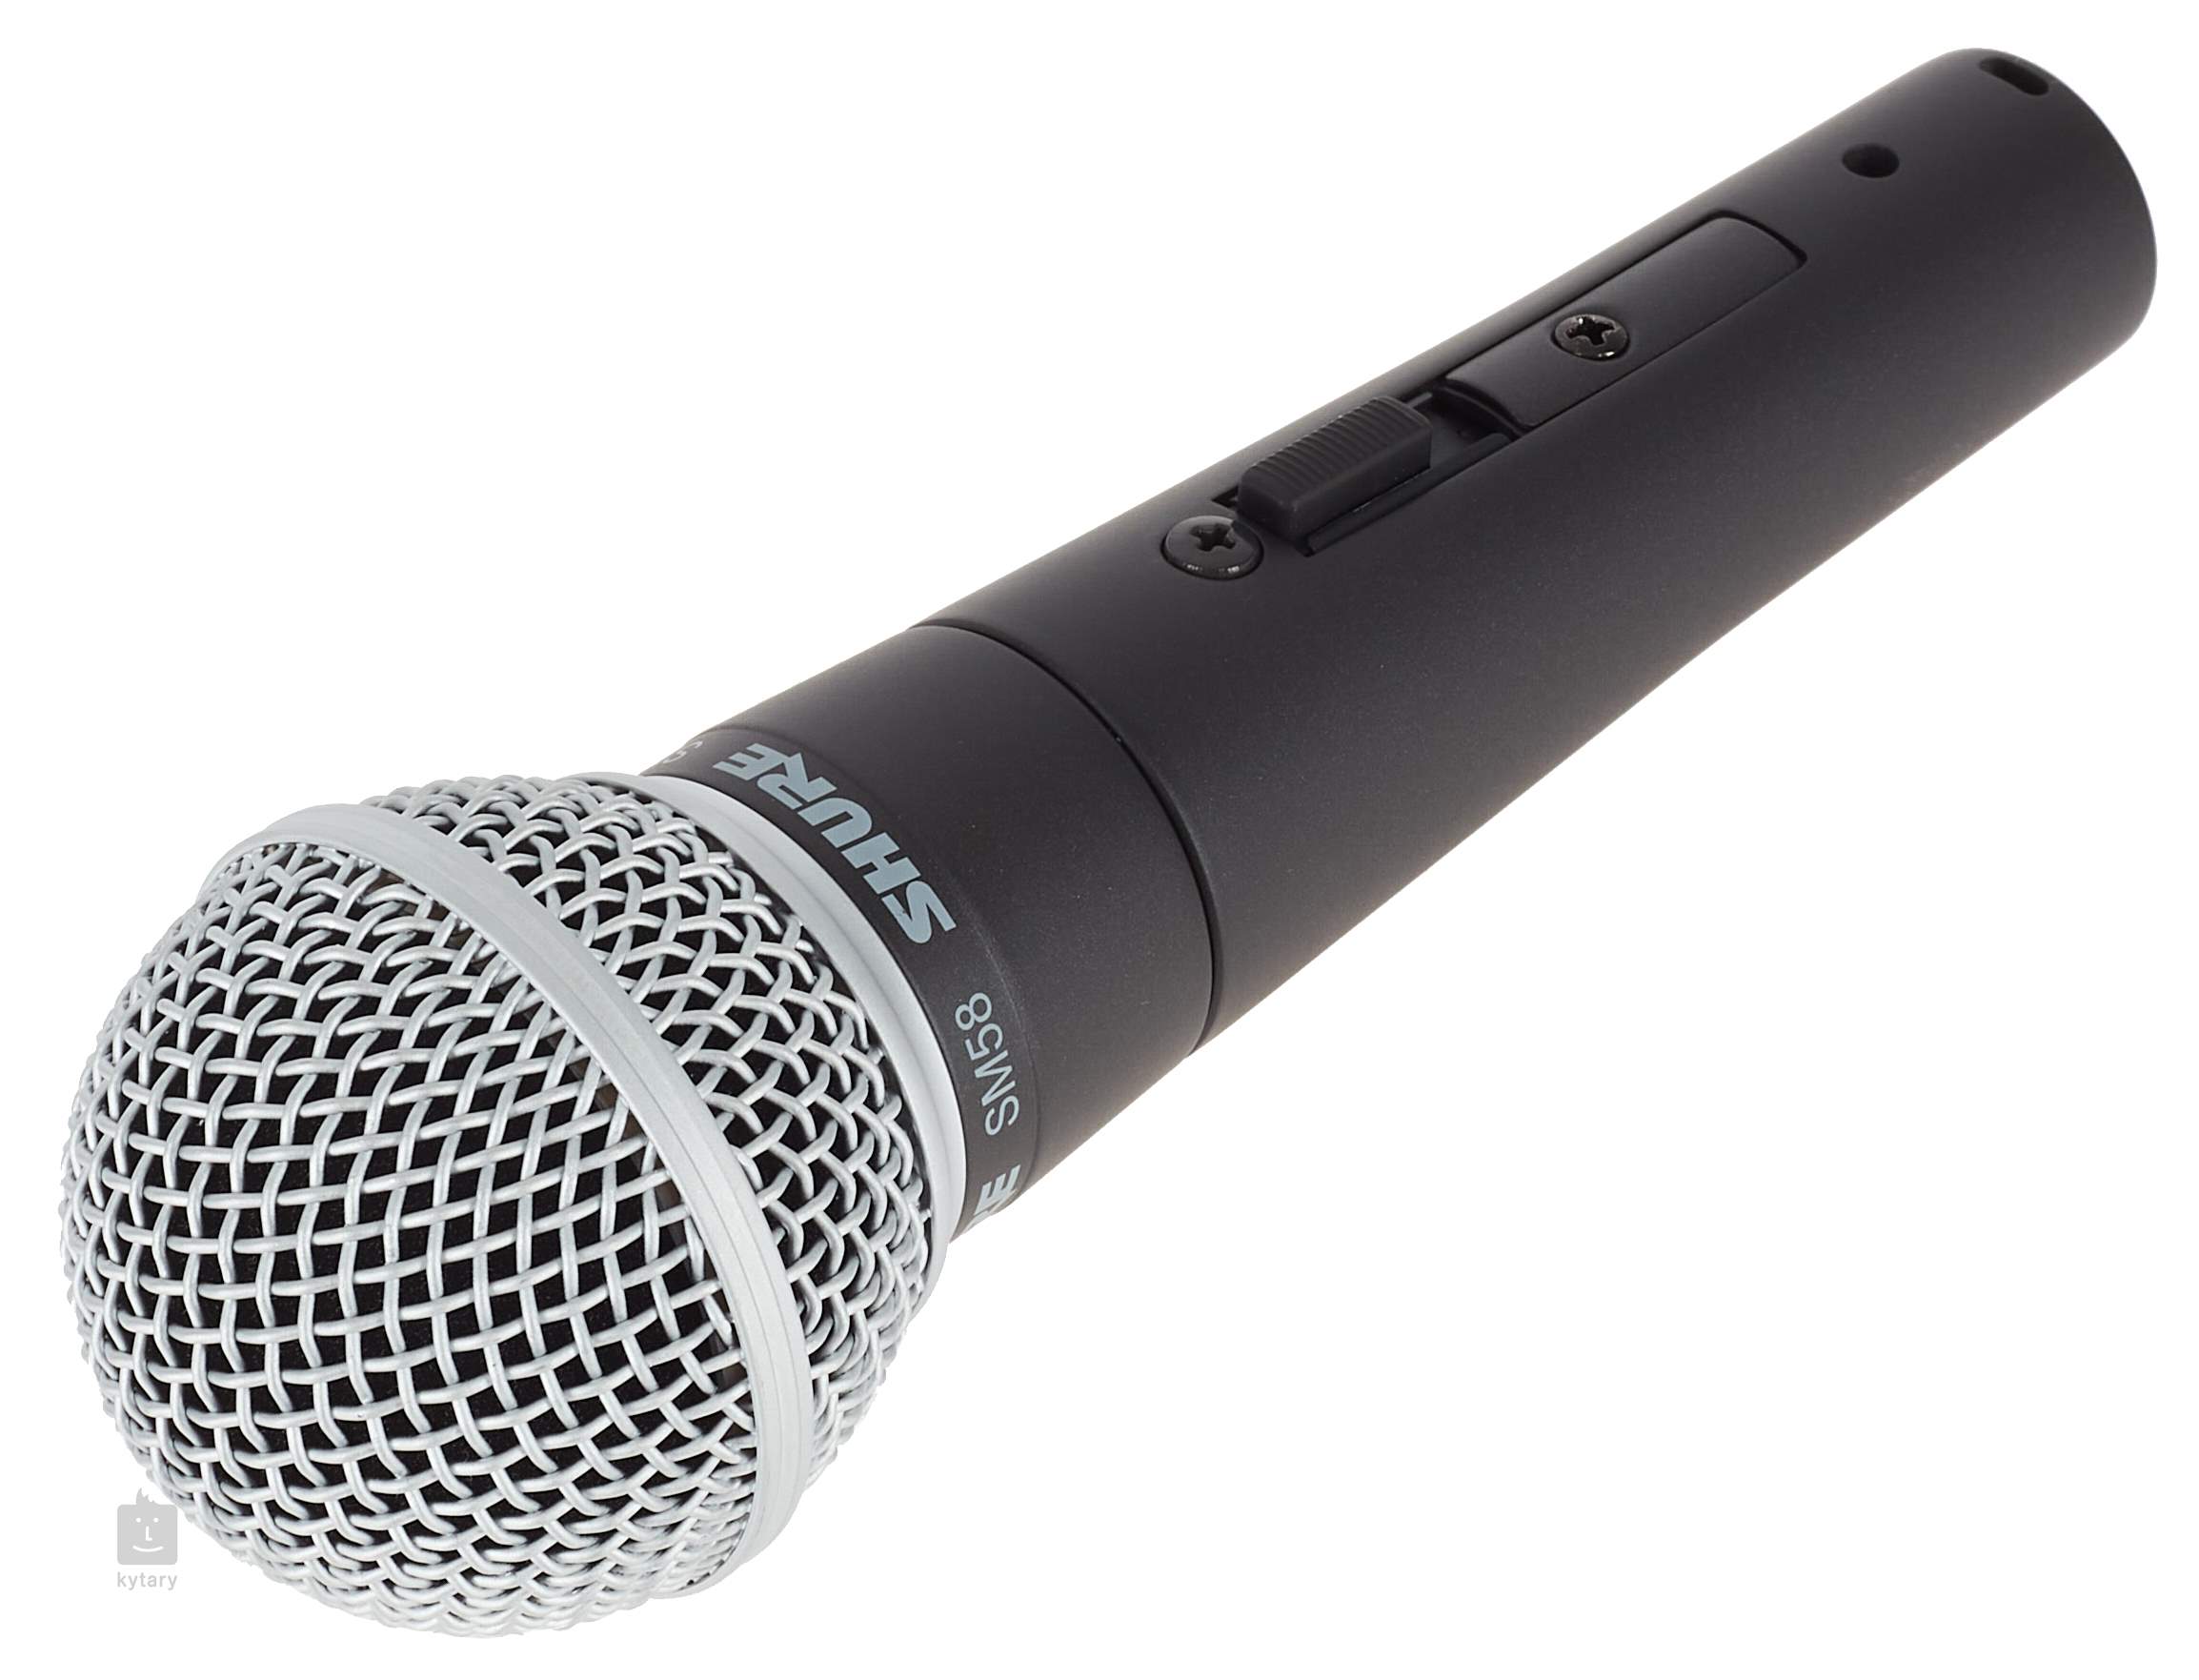 Microphone dynamique SHURE® SM58 - Posi-lectric